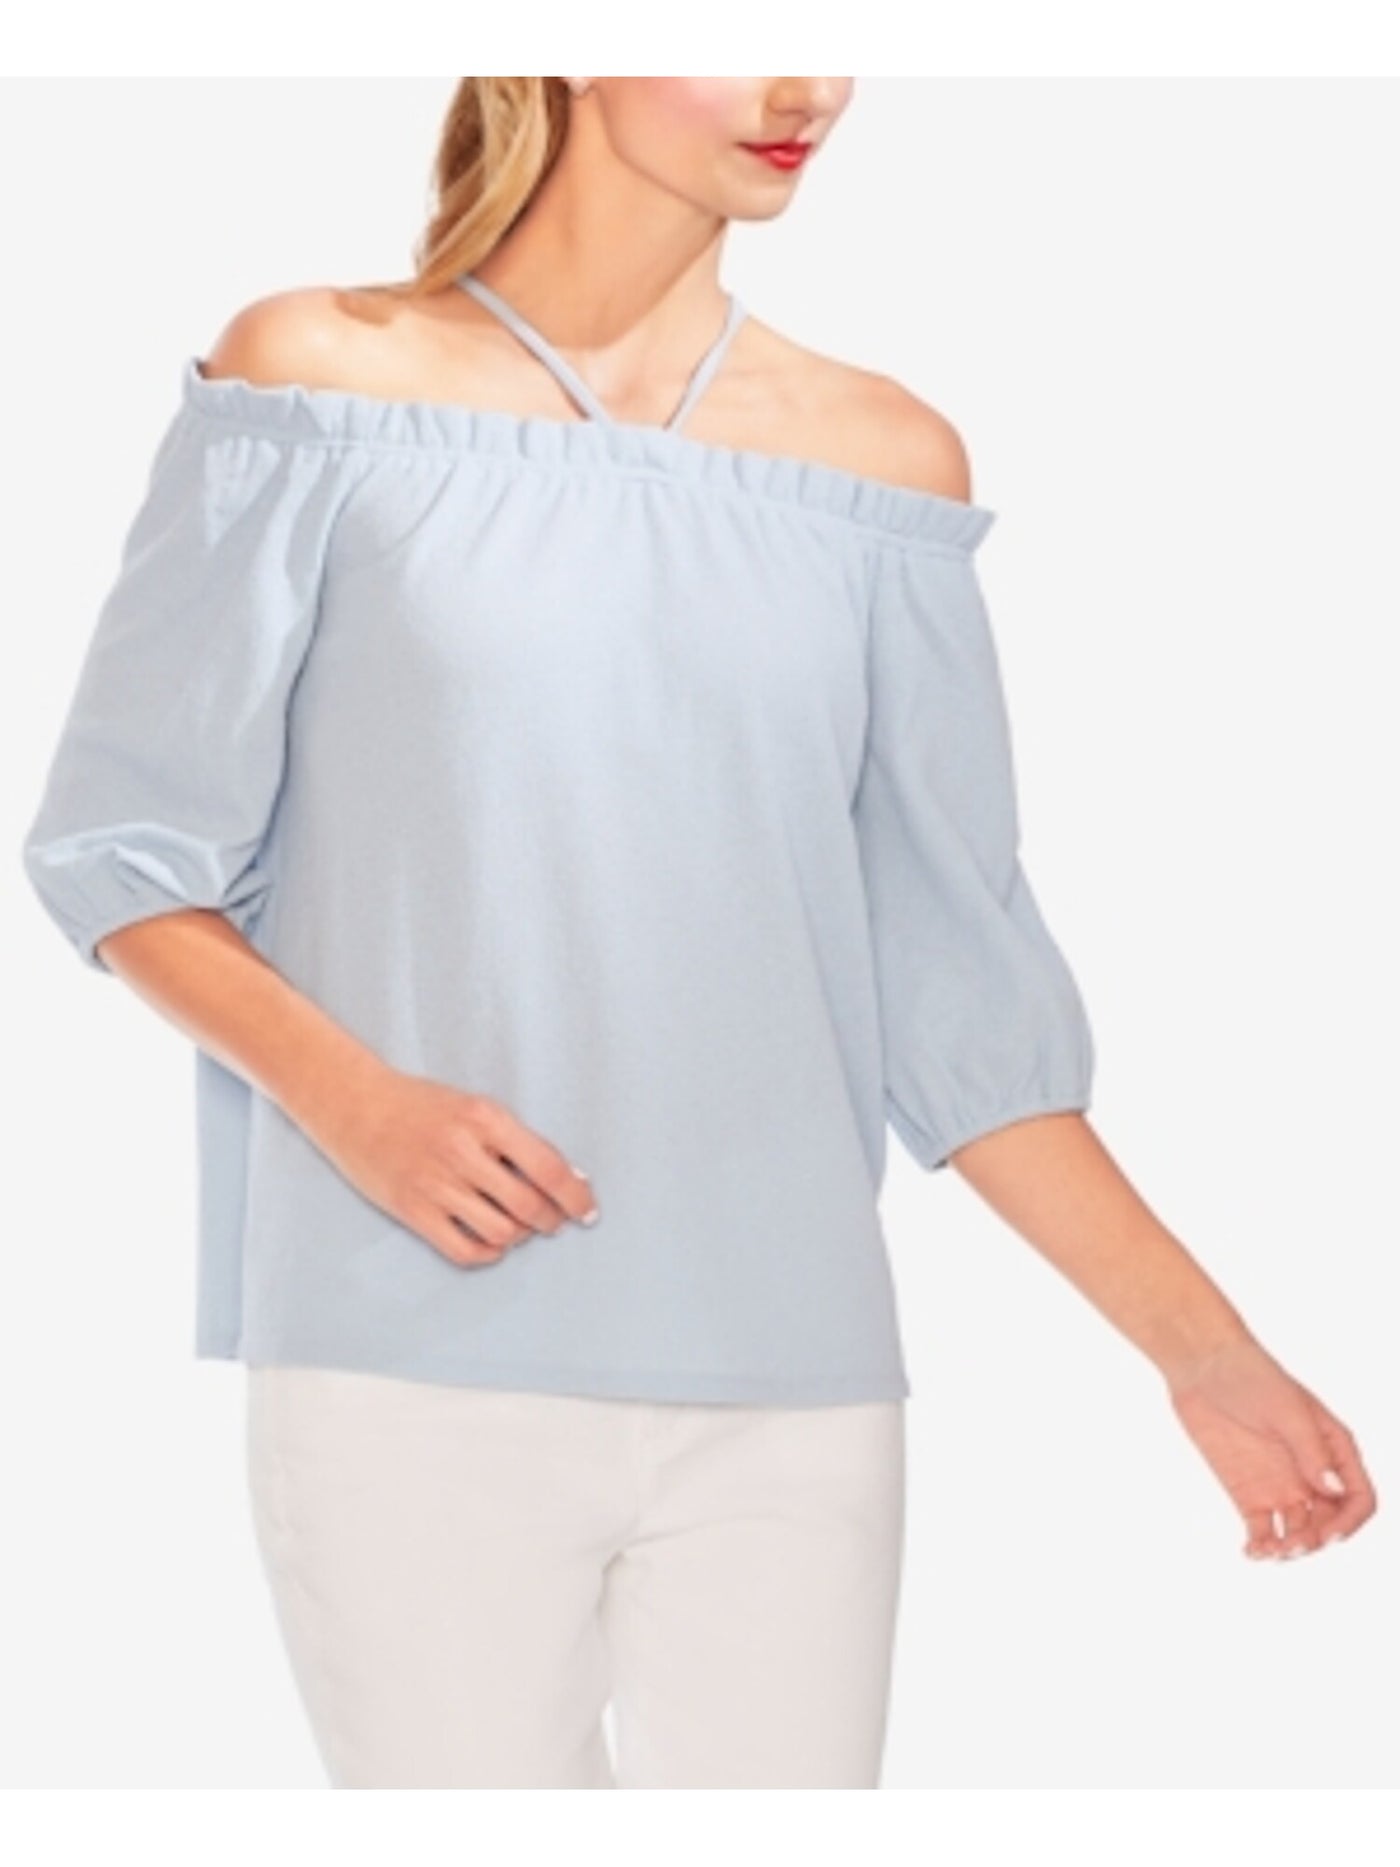 VINCE CAMUTO Womens Light Blue Tie Back 3/4 Sleeve Off Shoulder Top 2XS